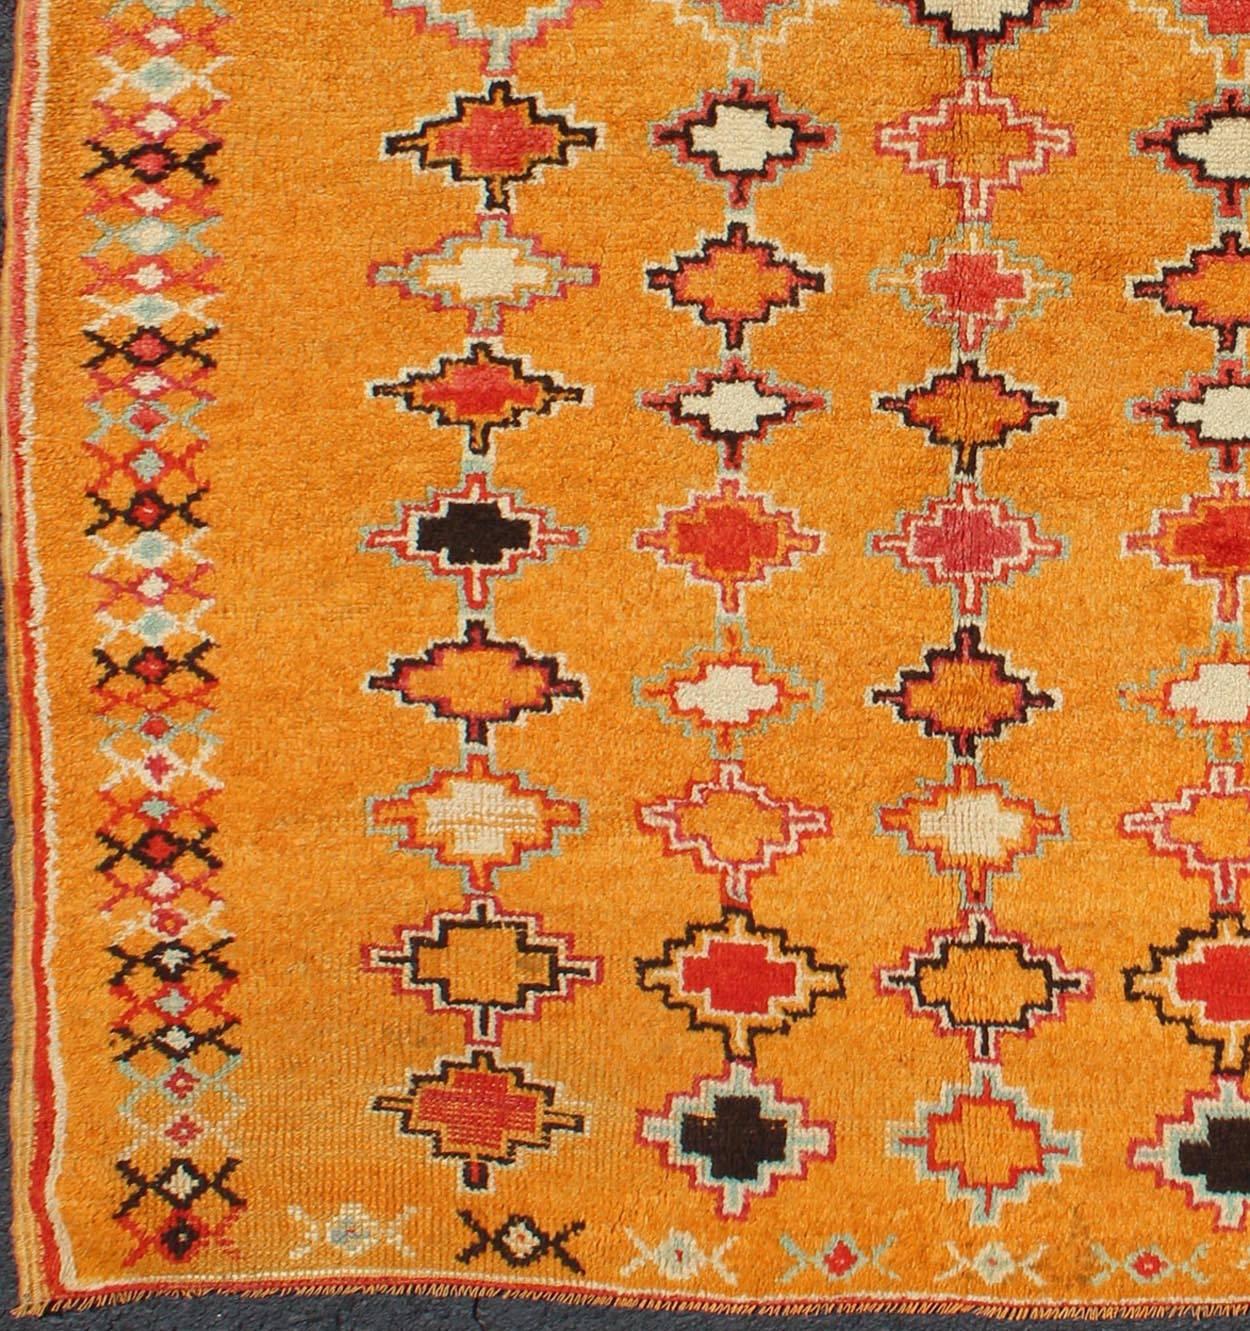 Saffron color antique Moroccan carpet with geometric patterns with orange, red, black, charcoal, white, light blue and ivory, rug H8-0802, country of origin / type: Morocco / Tribal, circa 1920.

Crafted in the early 20th century, this gorgeous